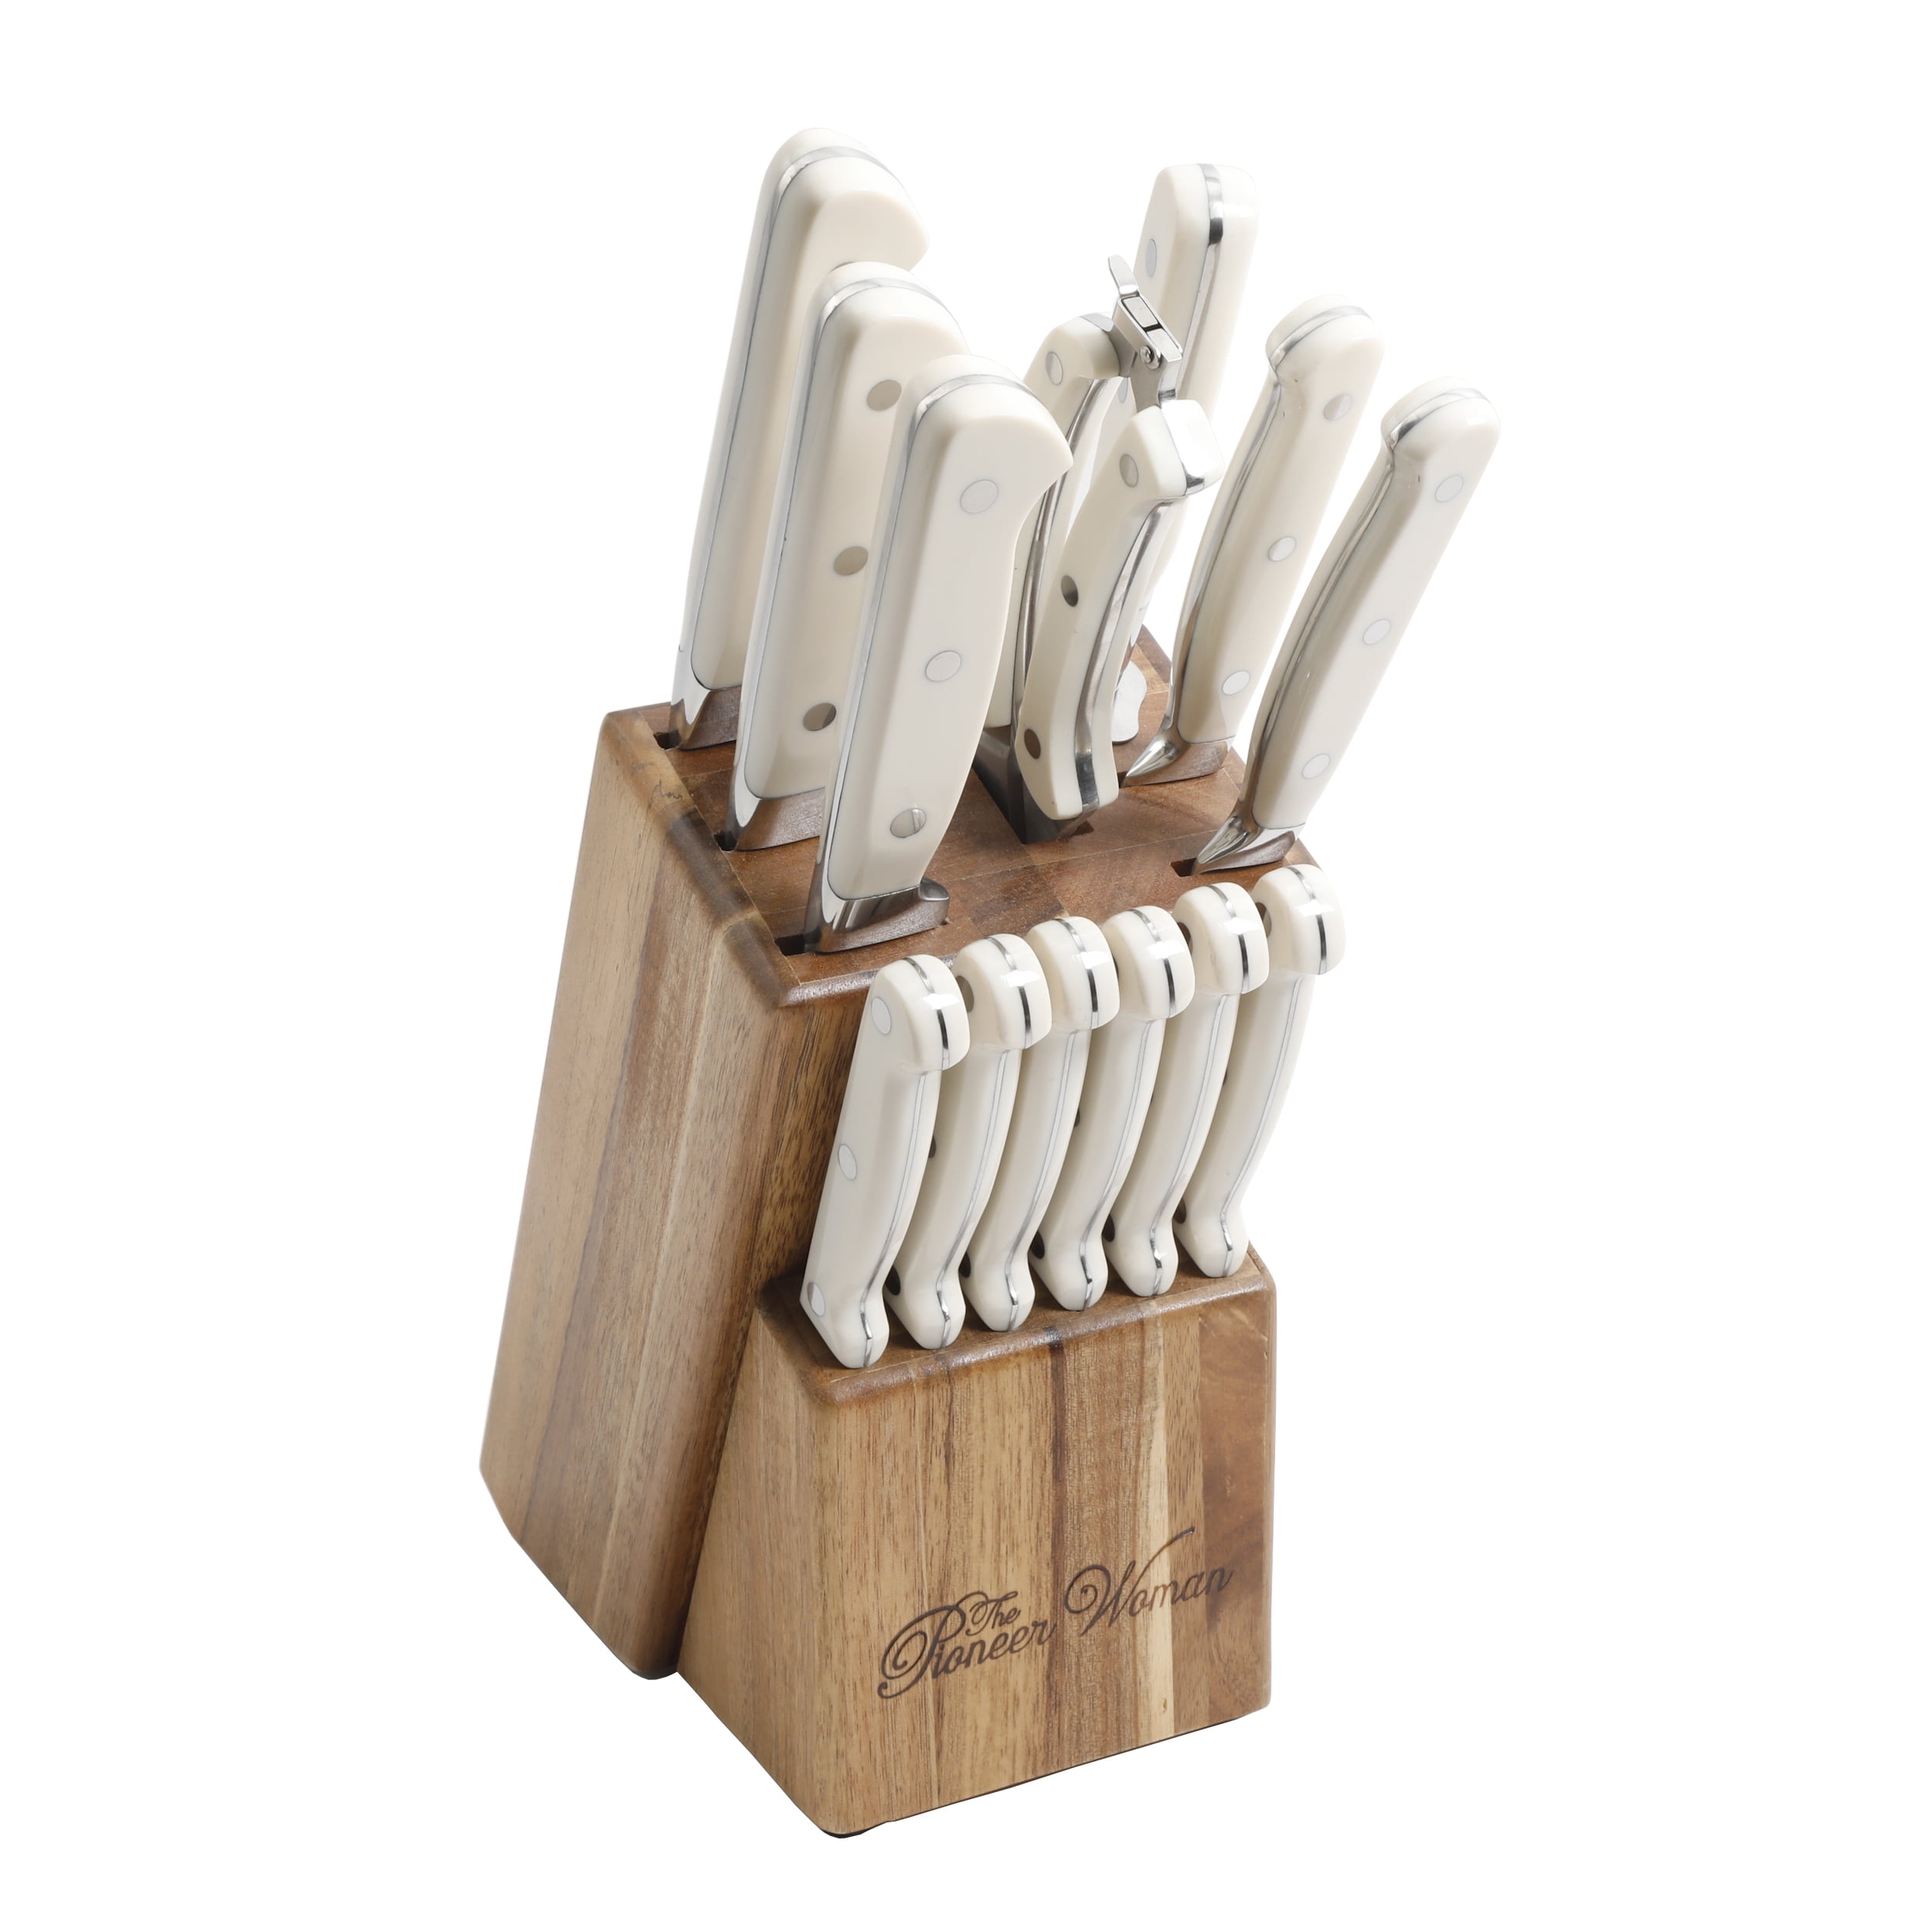 Shop The Pioneer Woman Frontier Collection 14-Piece Cutlery Set with Wood Block from Walmart on Openhaus